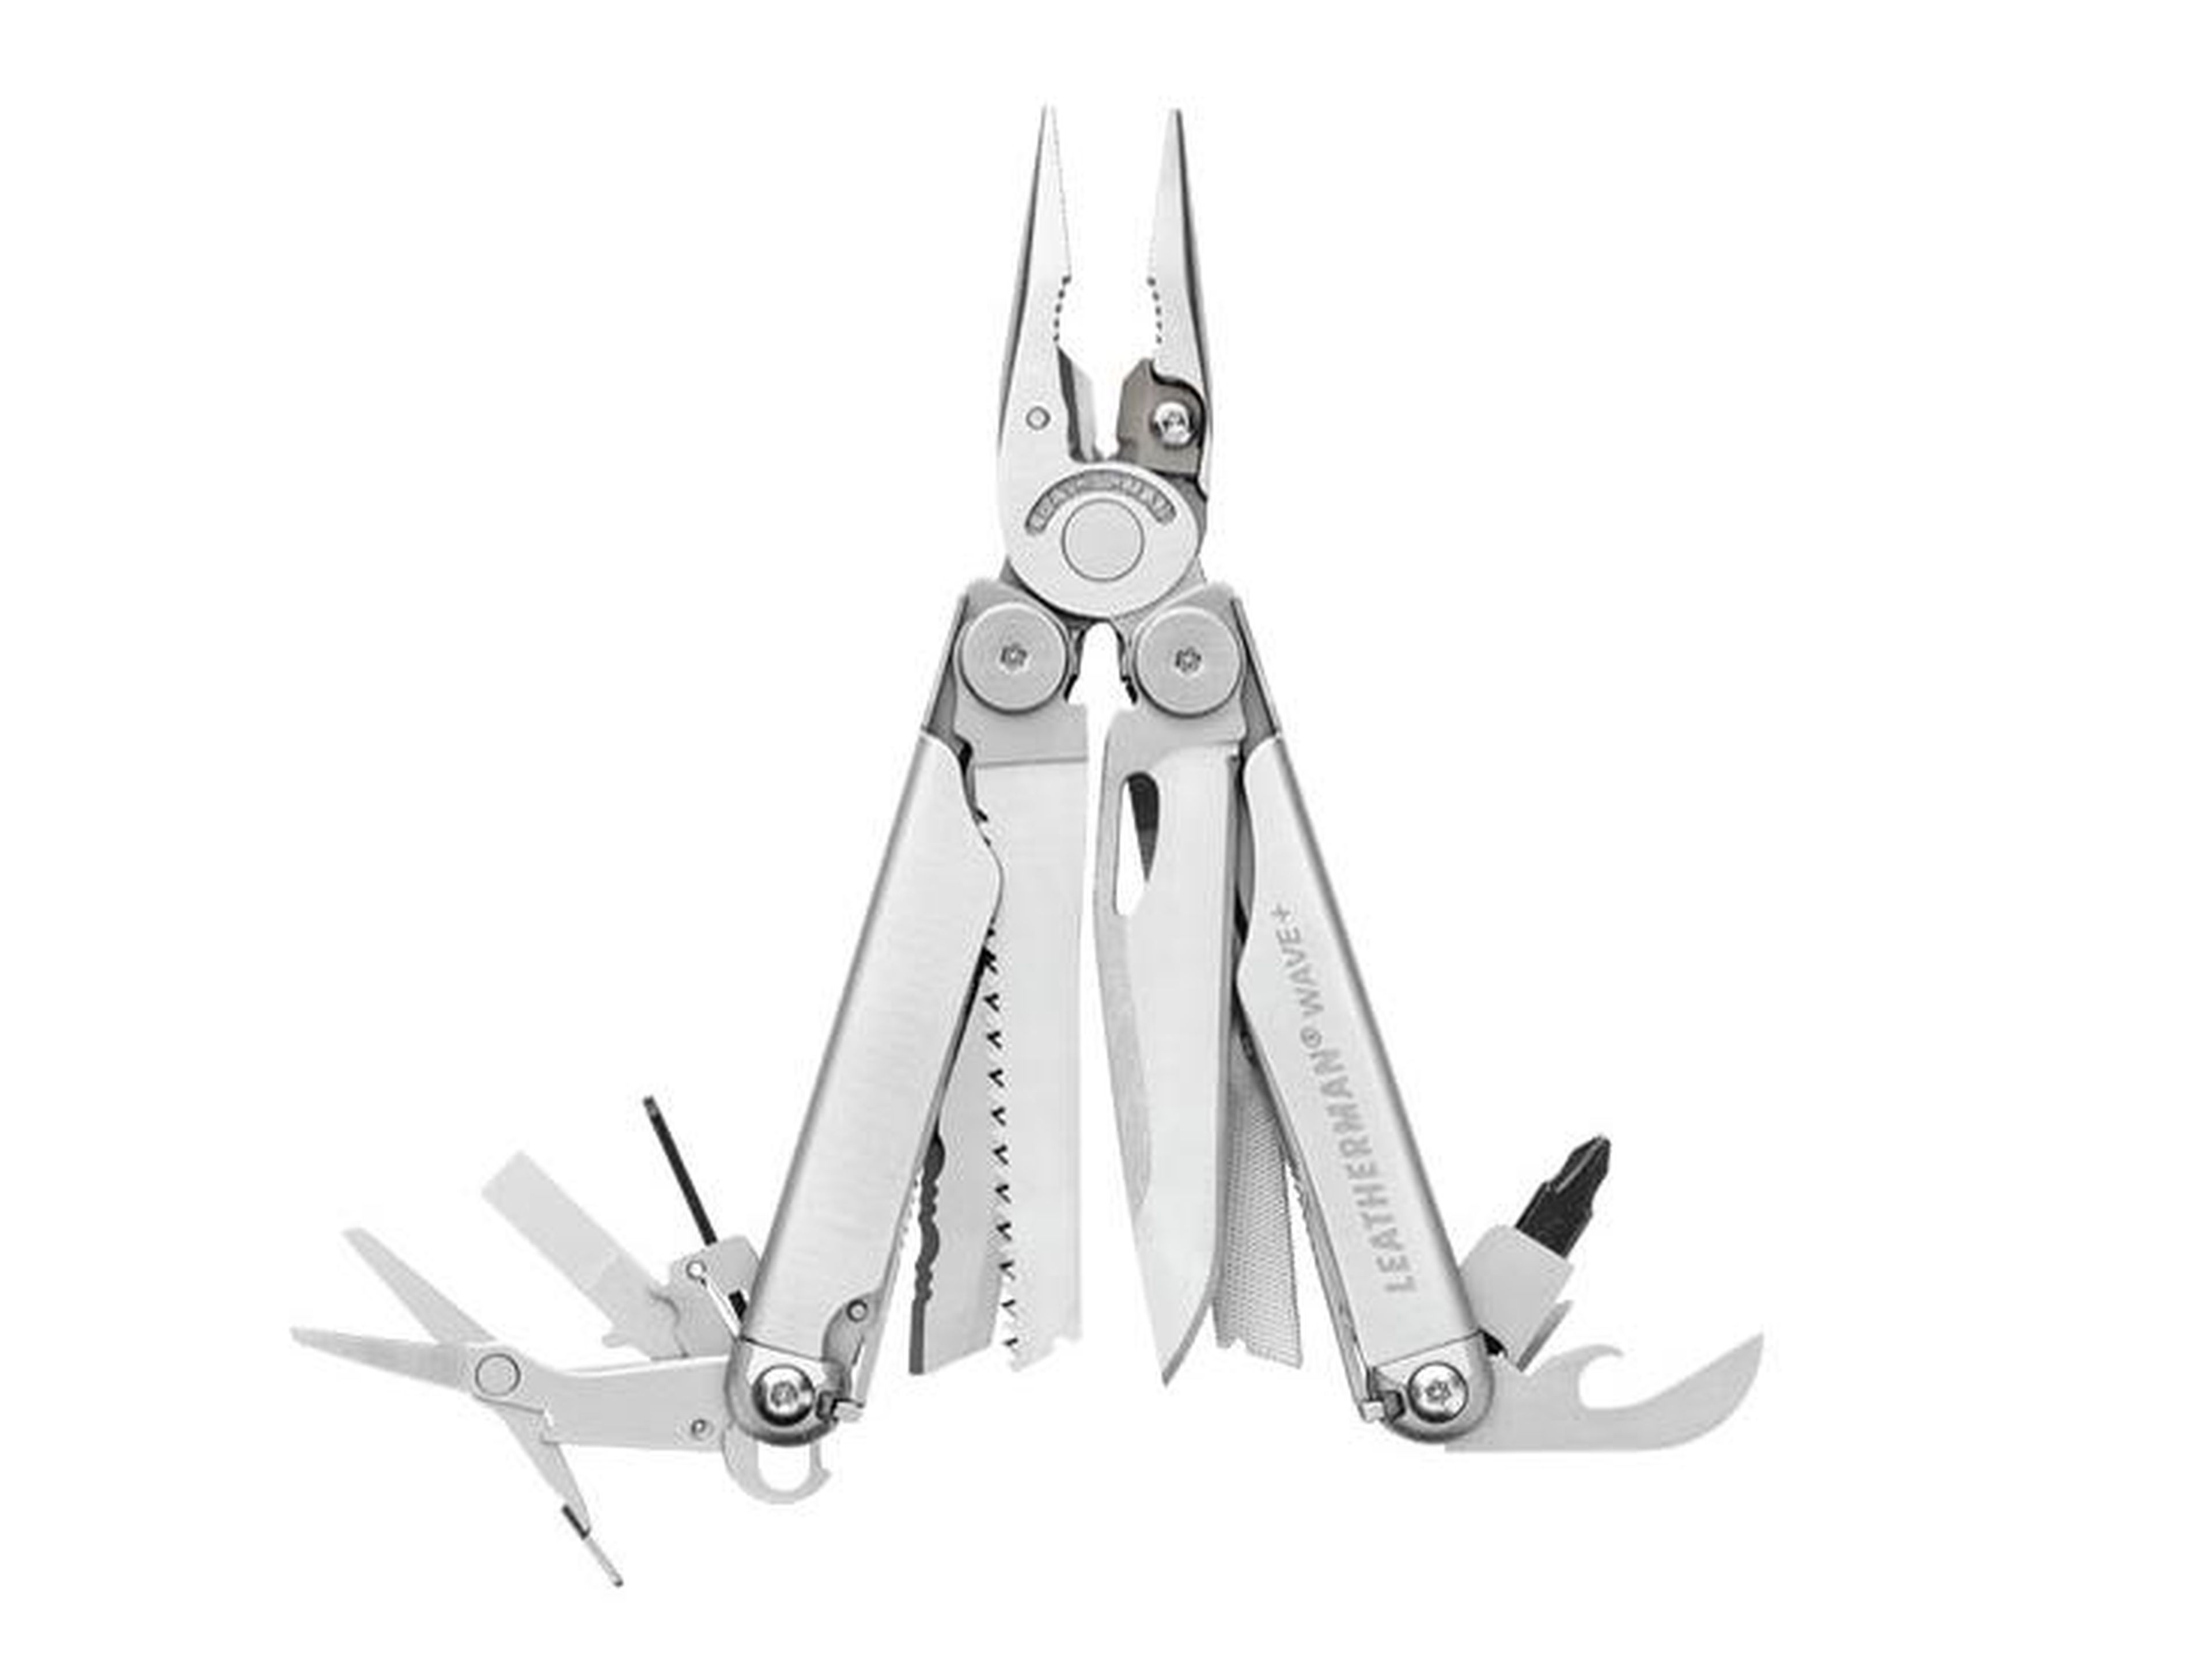 A multitool to fix almost anything